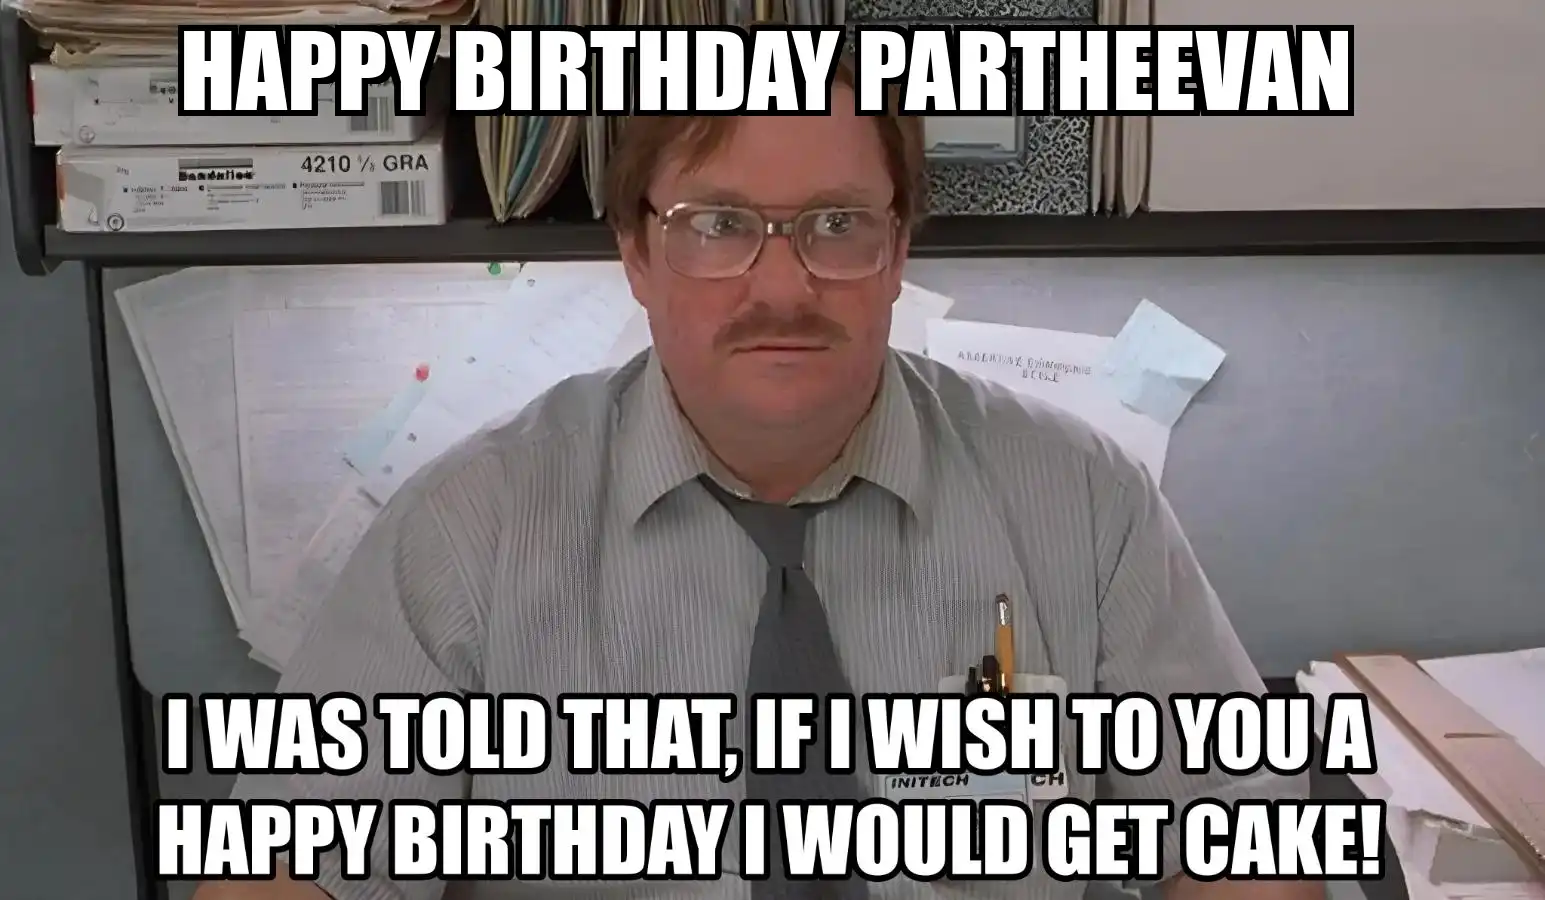 Happy Birthday Partheevan I Would Get A Cake Meme